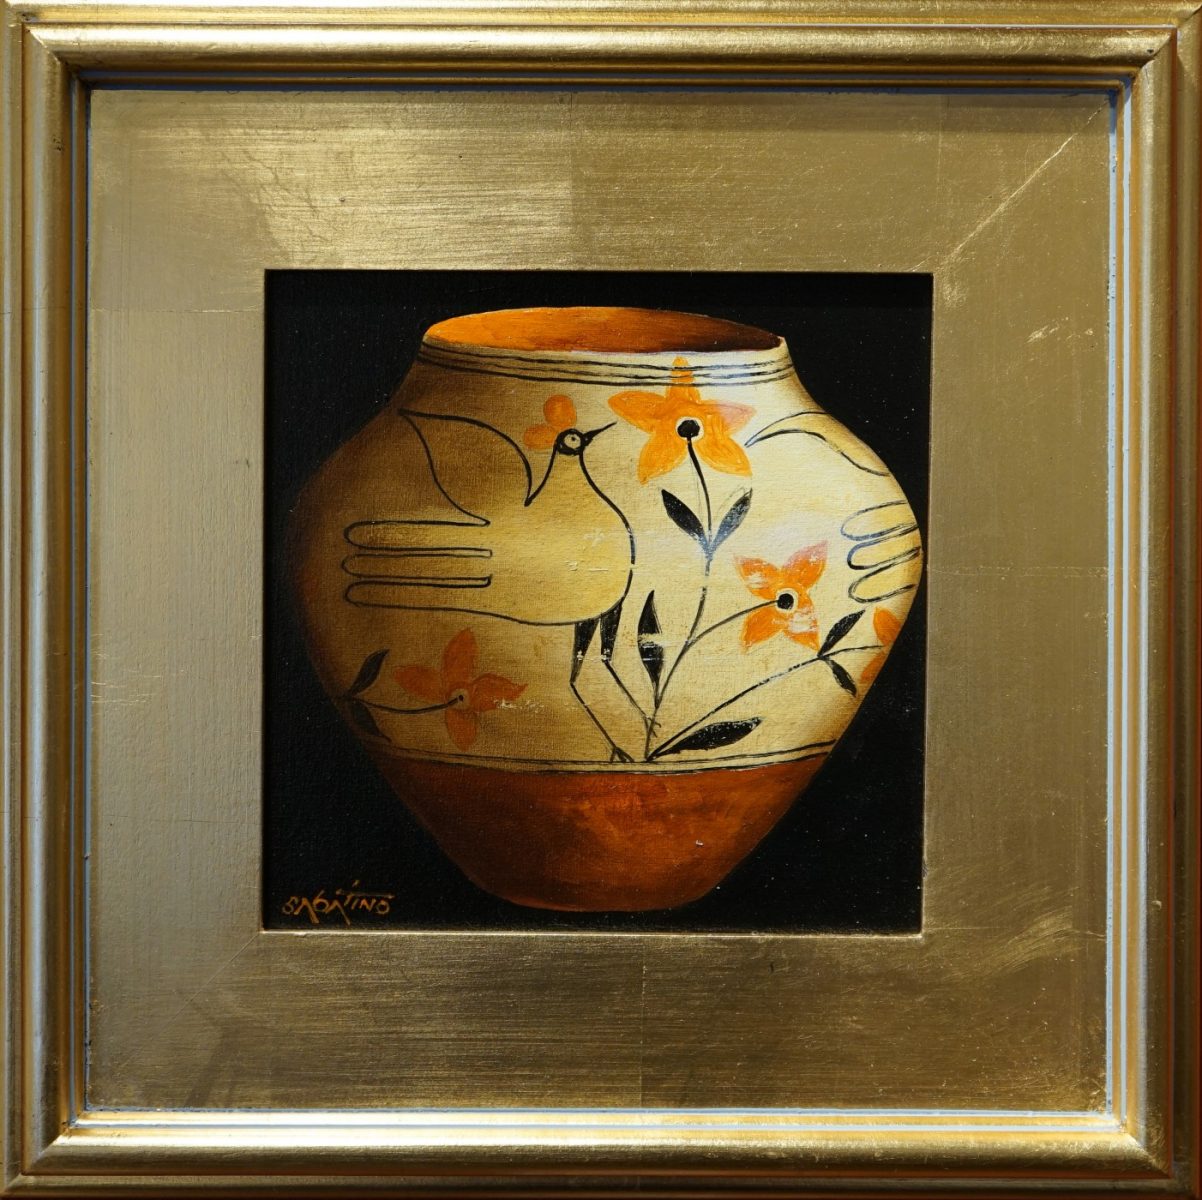 Oil painting of Native American pottery by Chuck Sabatino